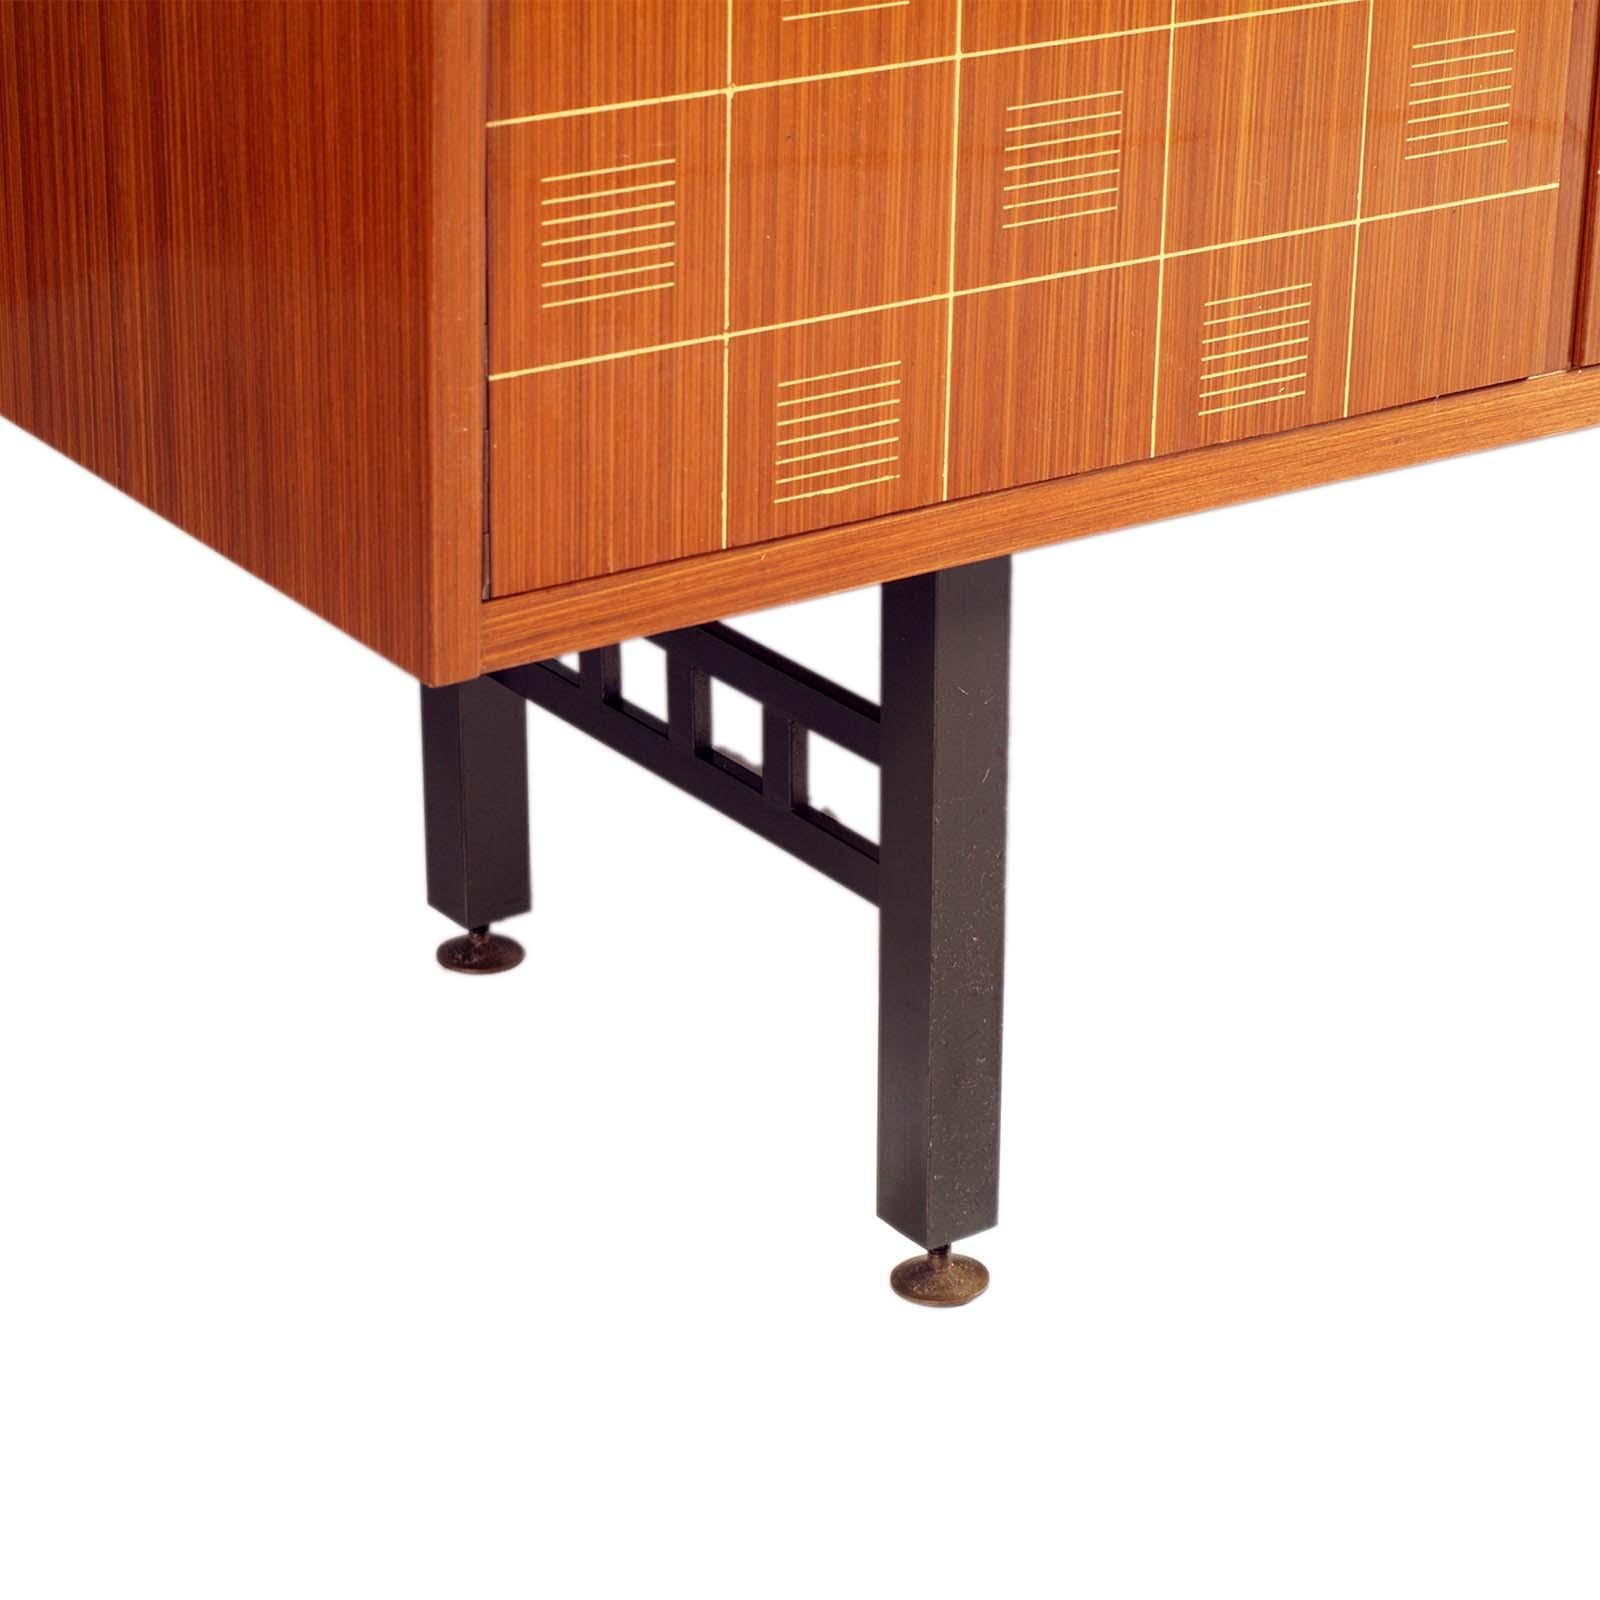 1960s Sideboard La Permanente Mobili Cantù in Veneered Rosewood with Maple Inlay For Sale 1